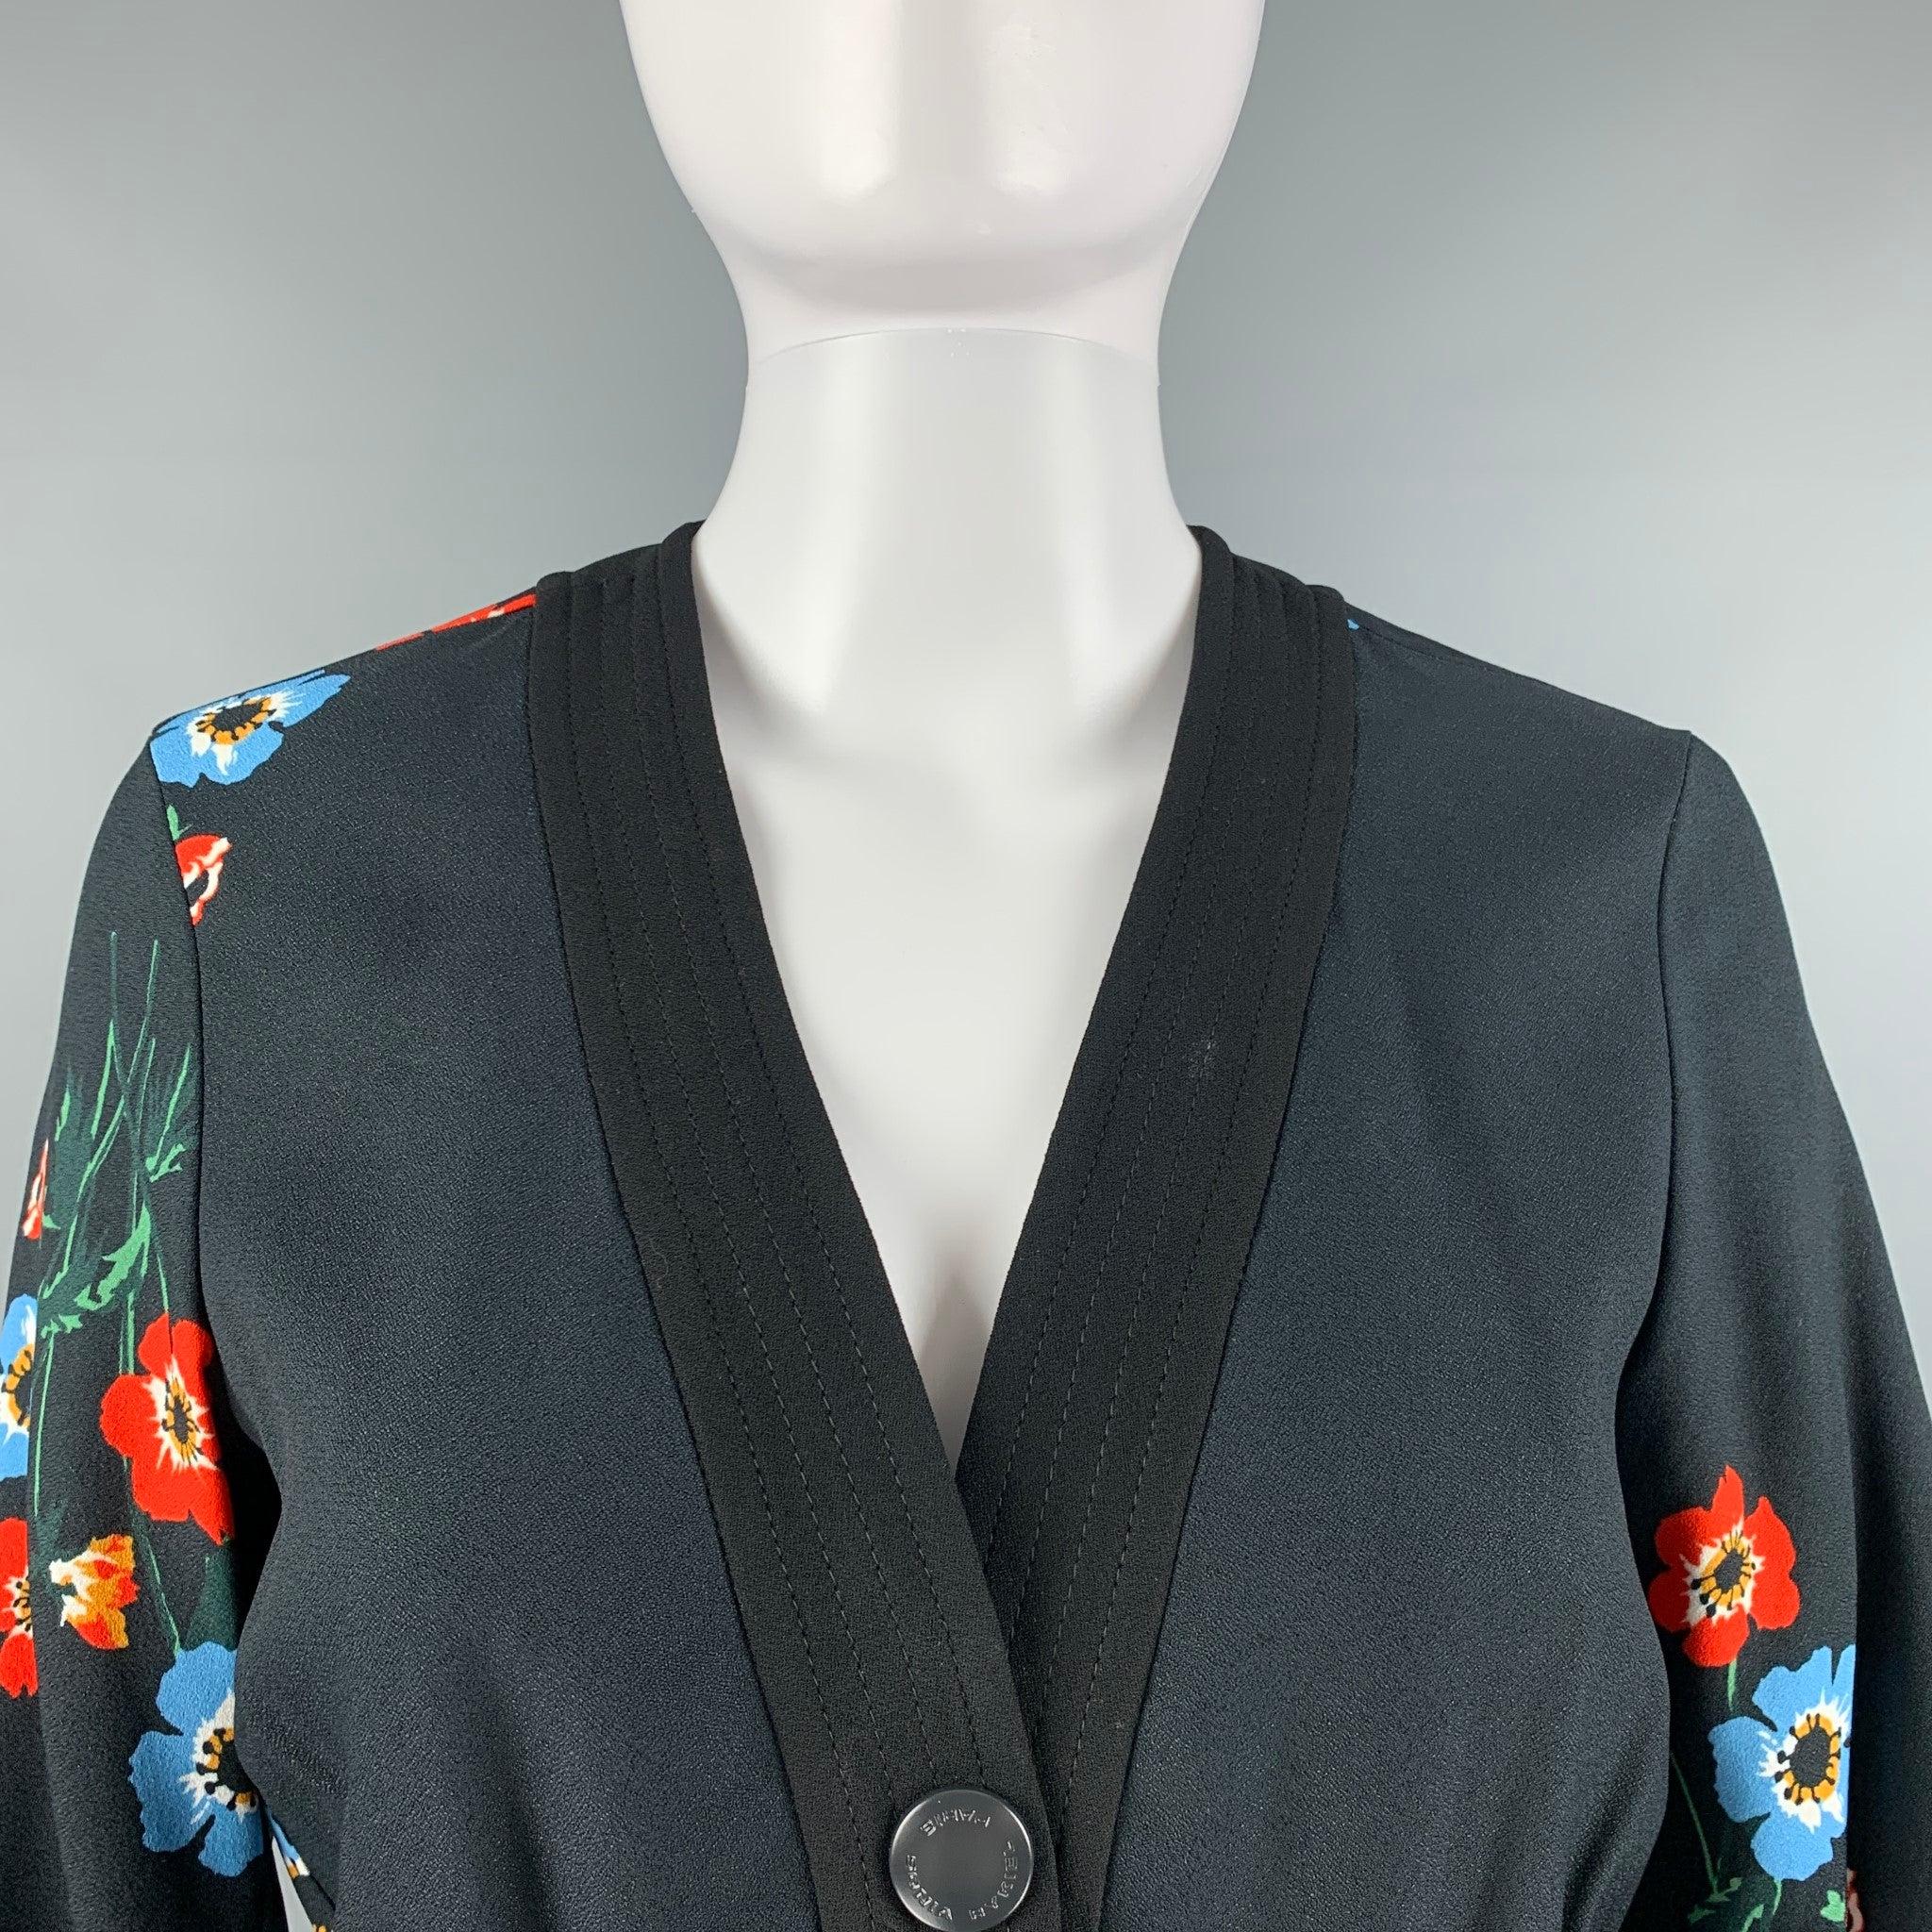 SONIA RYKIEL long sleeve dress comes in a black and multi-color floral viscose woven material featuring a shirt dress style, elastic waist, patch pockets, v-neck, and and front snap button closure.Excellent Pre-Owned Condition. 

Marked:   34